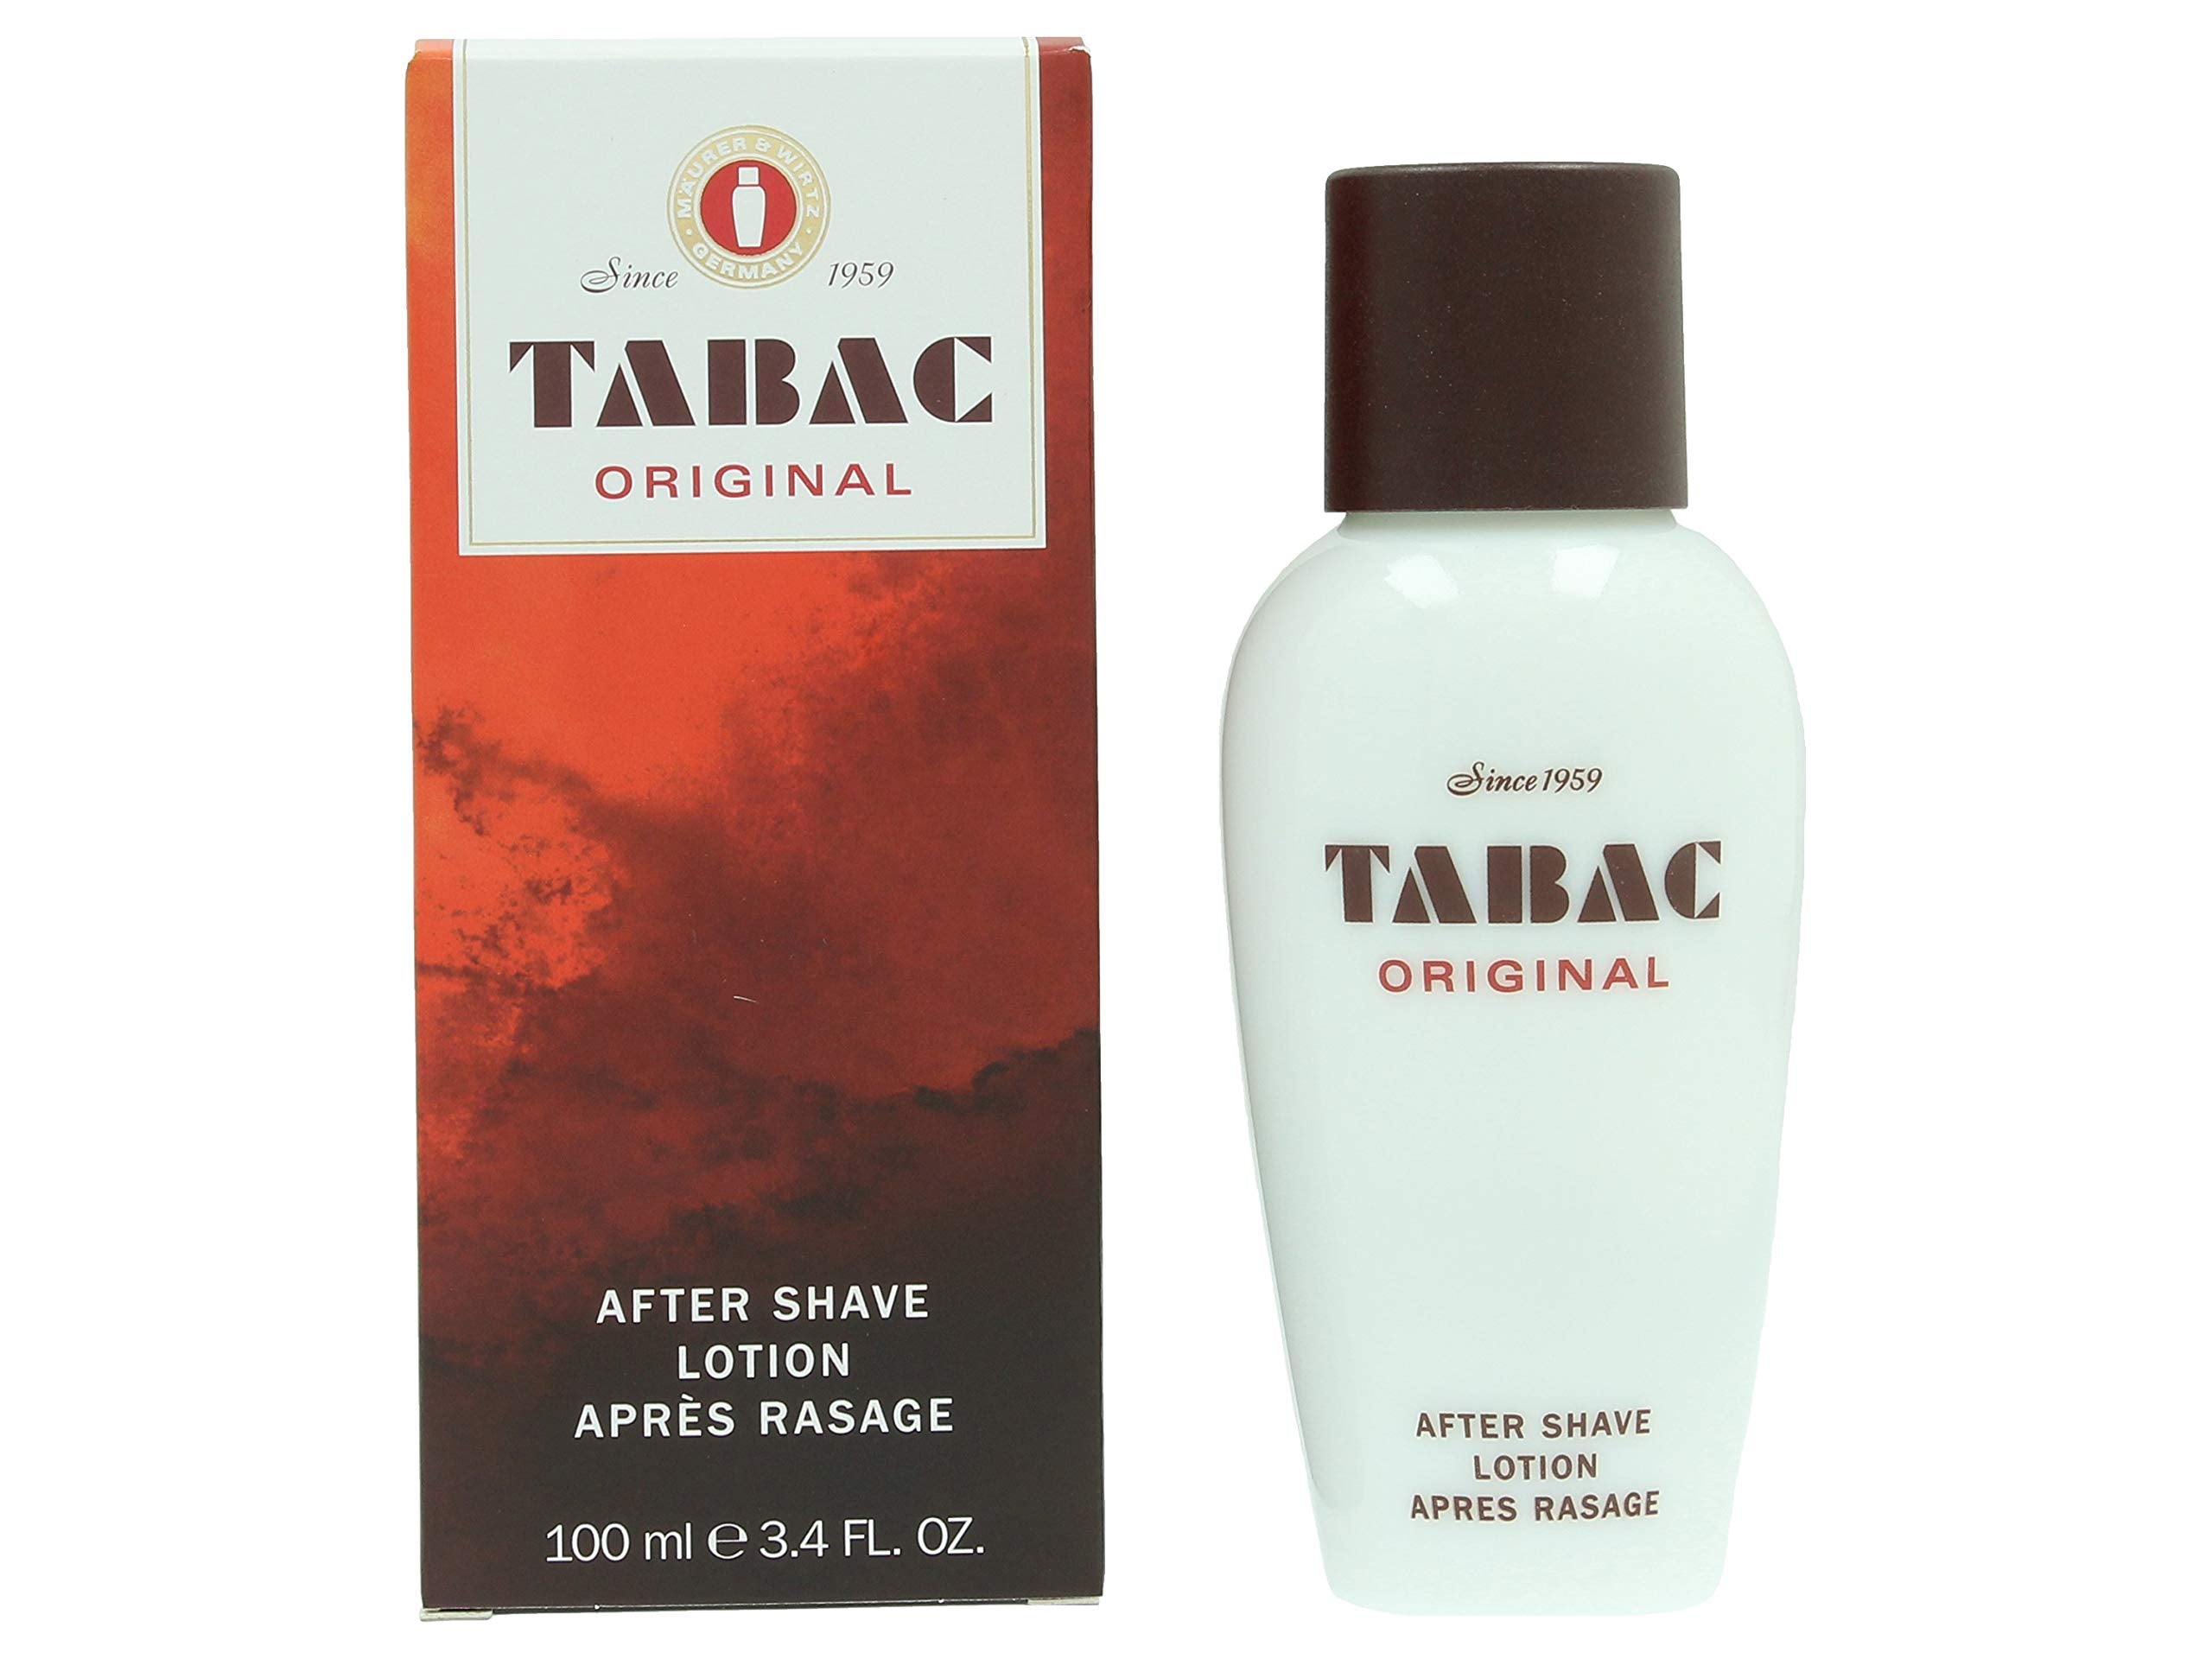 Tabac Original After Shave Lotion 300mL